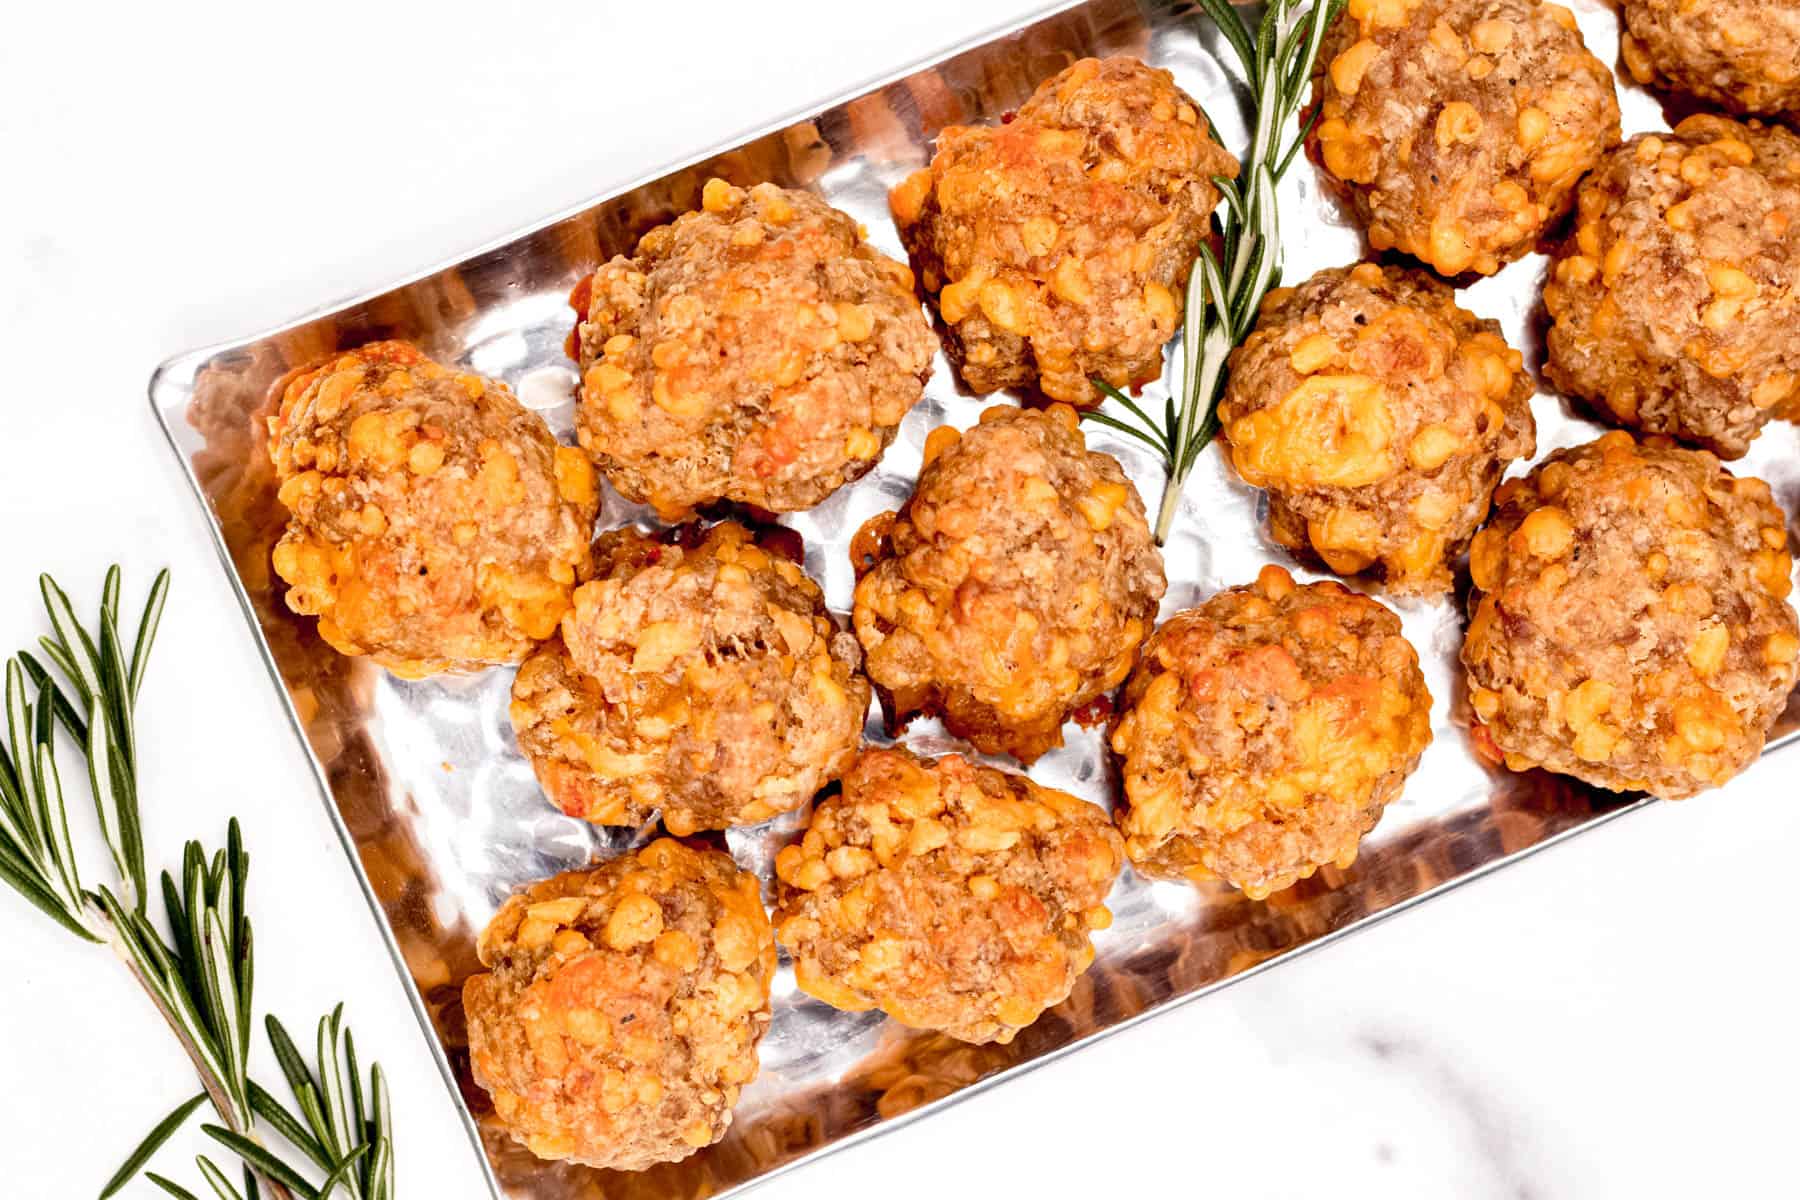 Sausage balls on a Tray with Rosemary Sprigs.